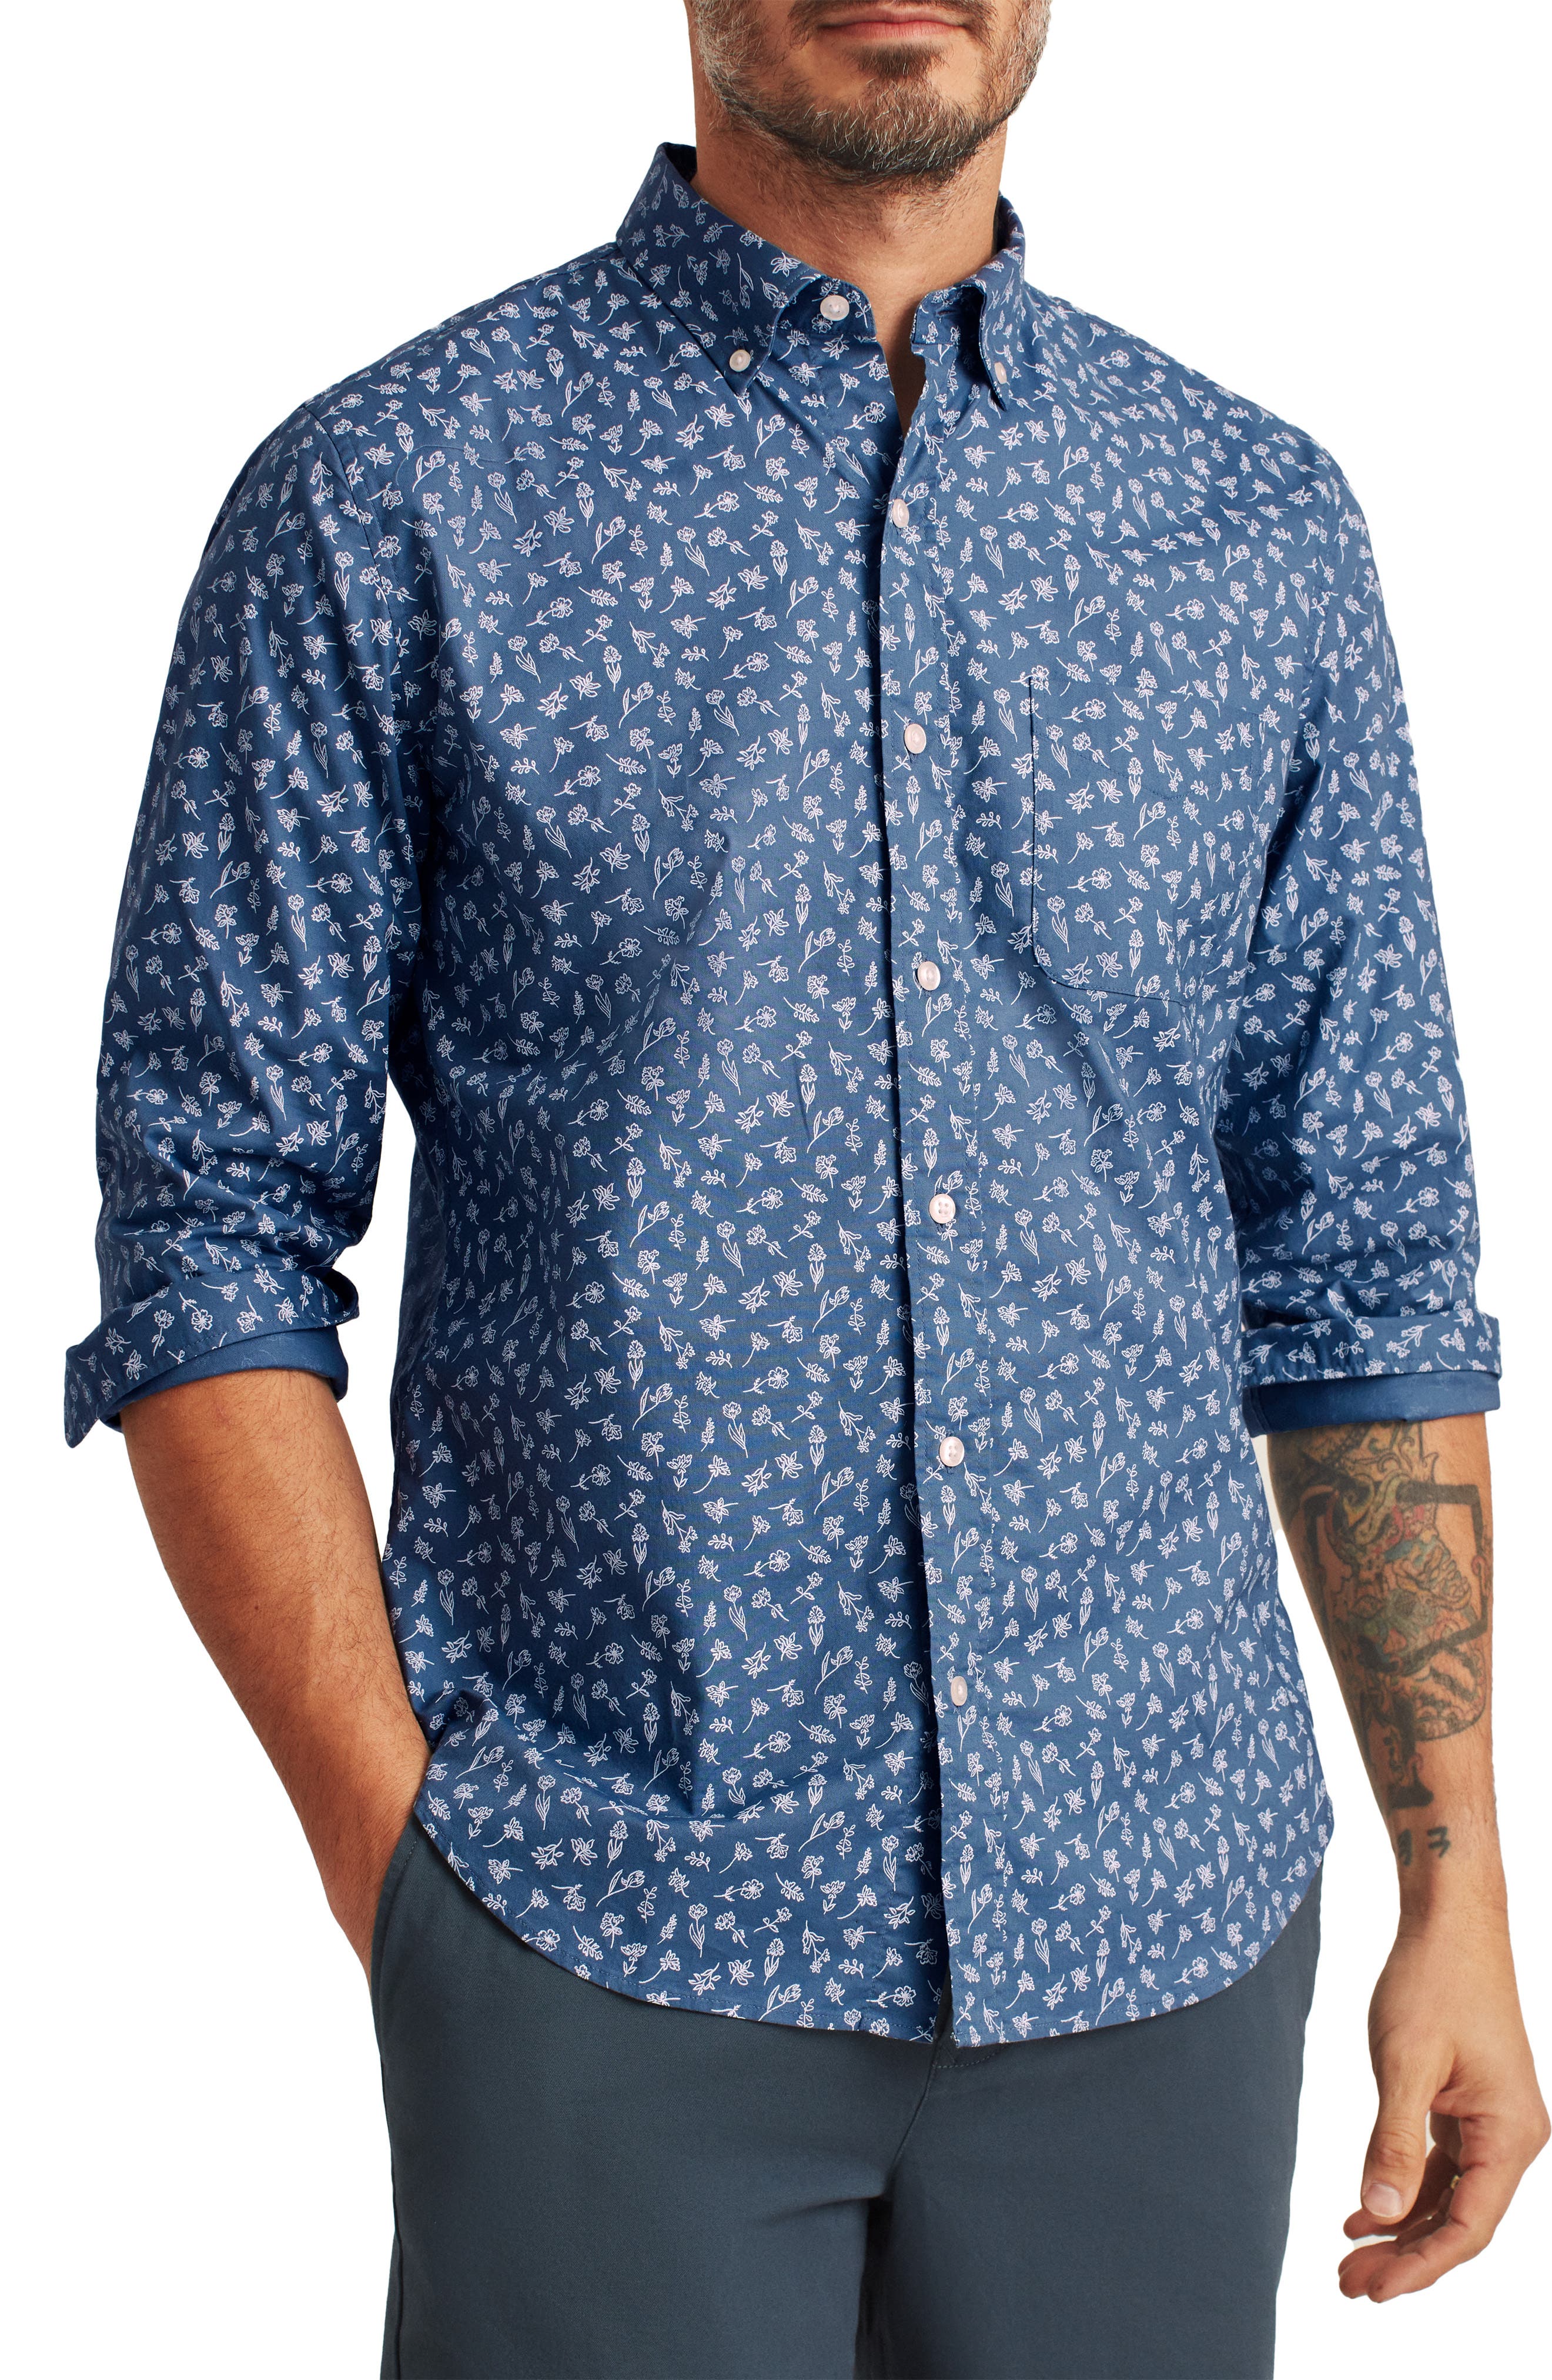 Men's Business Casual Shirts | Nordstrom